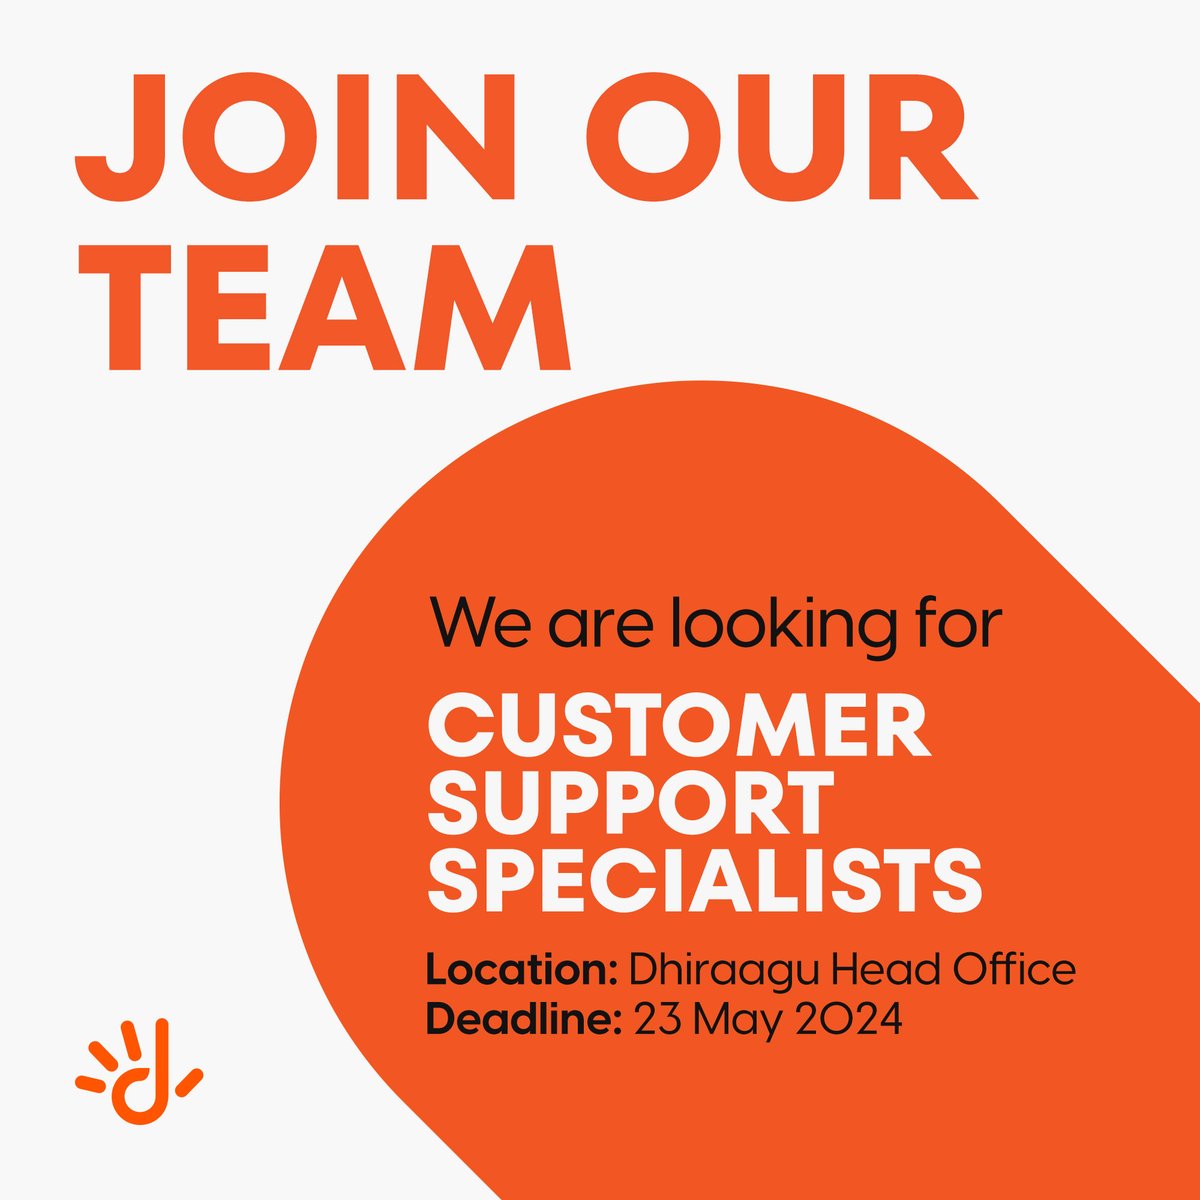 Join our team to shape the digital future! We are looking for Customer Support Specialists. To apply please visit - a.peoplehum.com/2f6om Deadline – 23 May 2024.